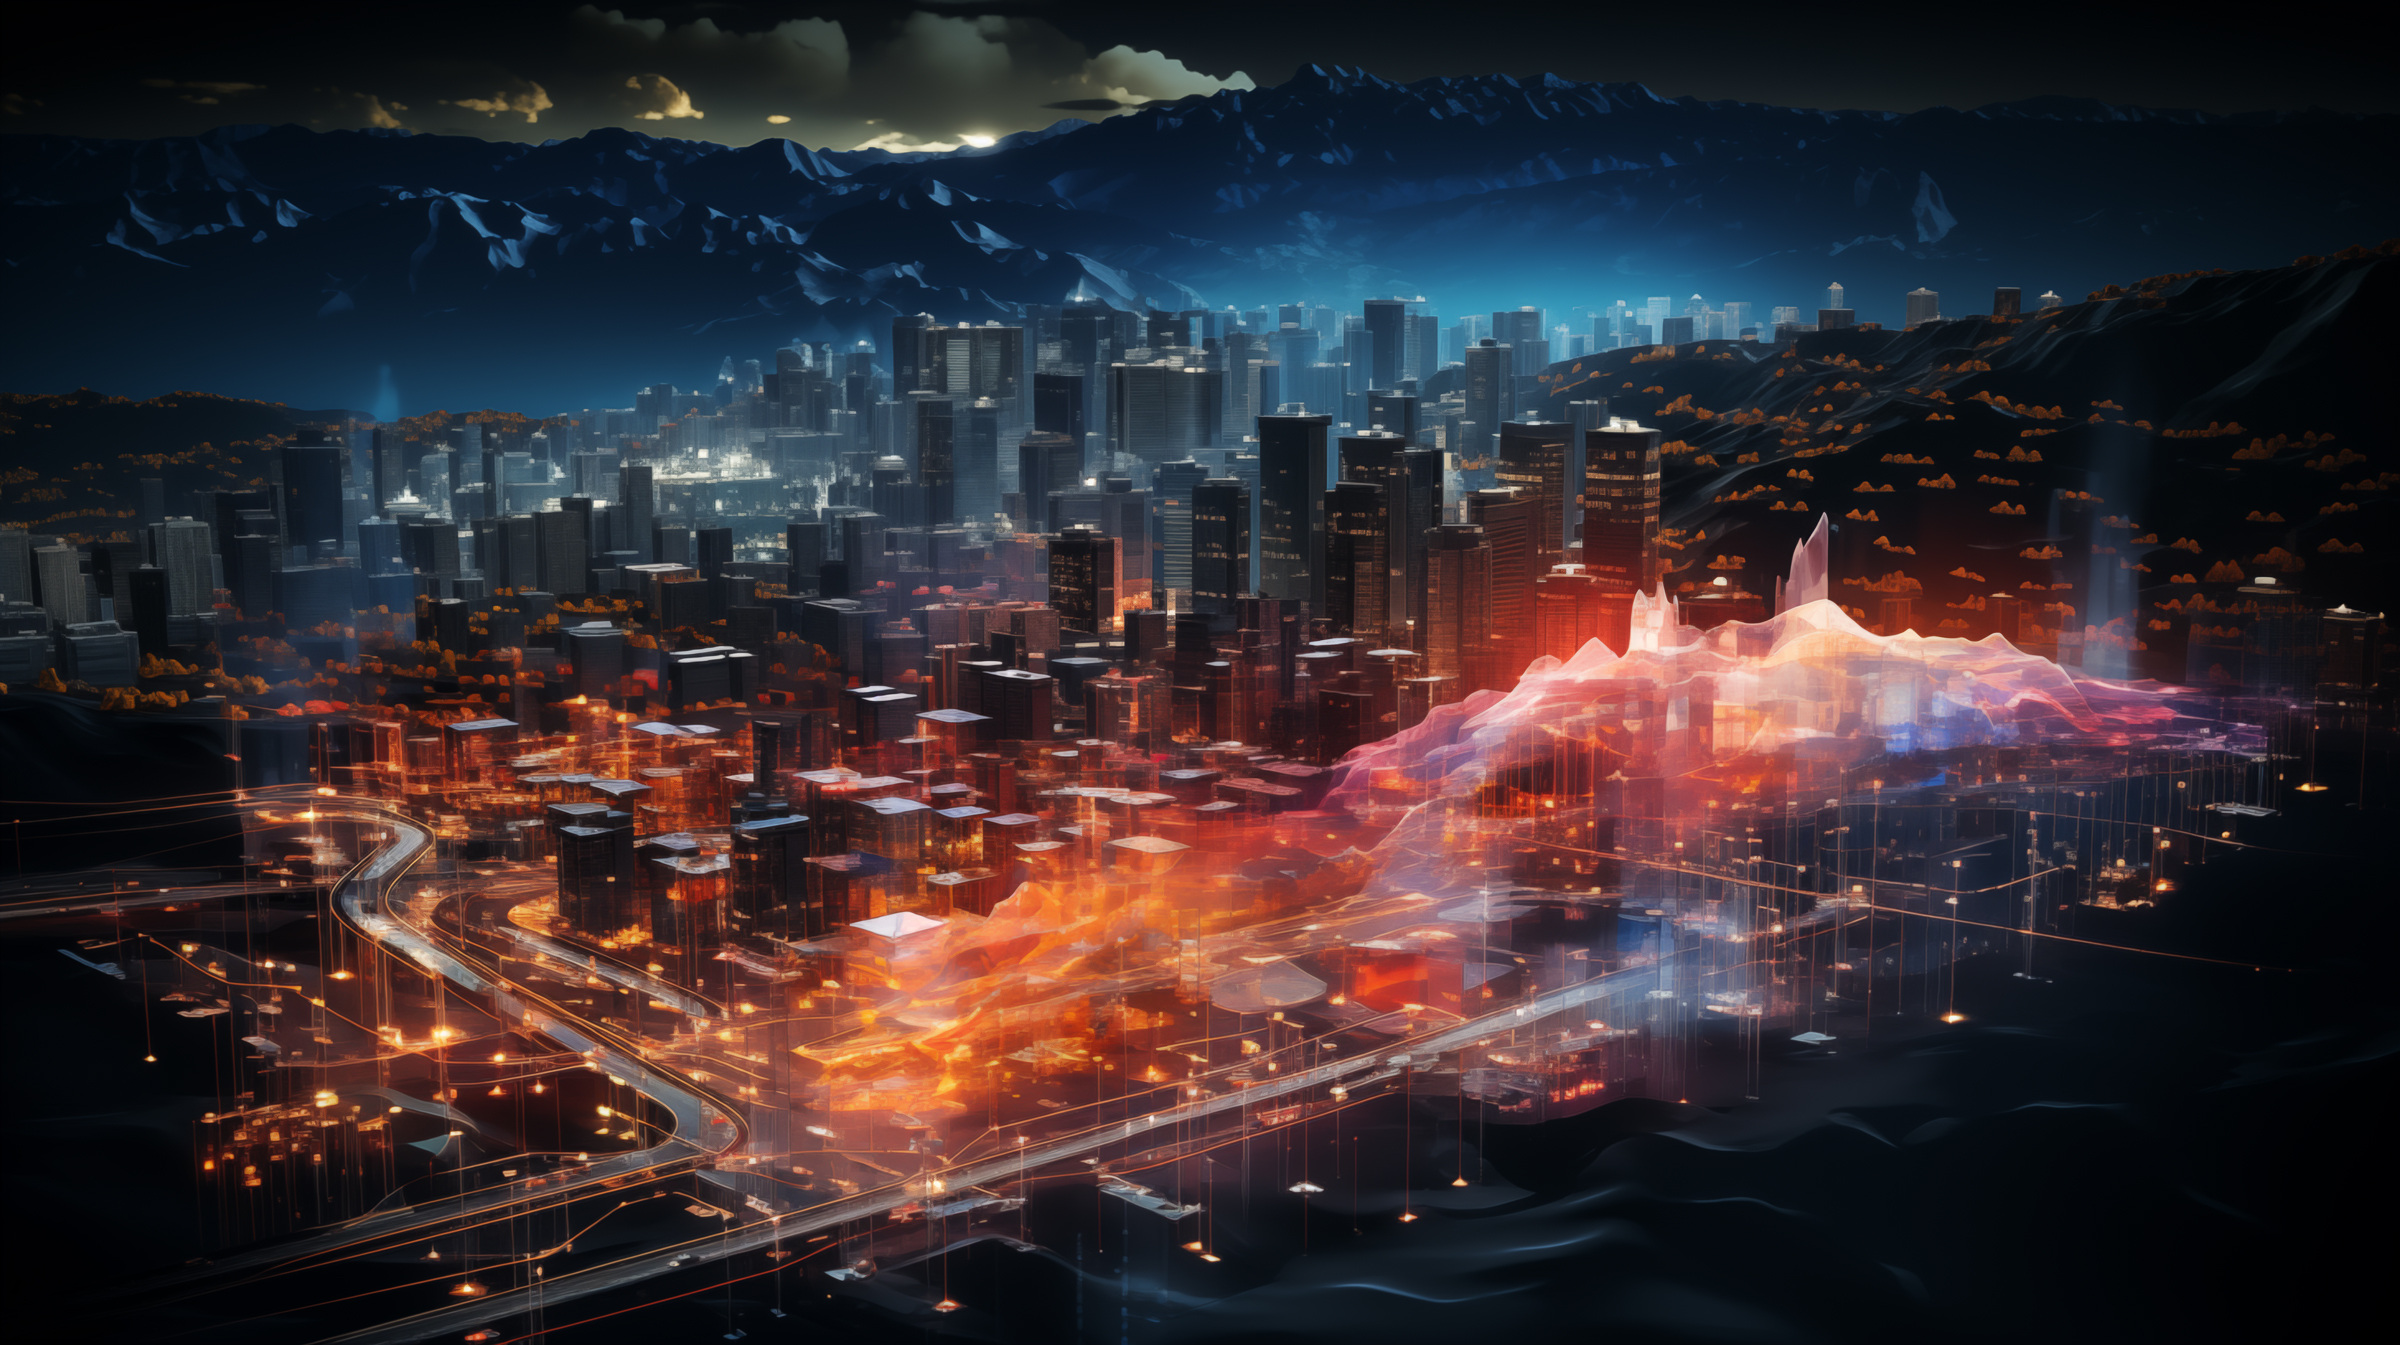 A holographic simulation of a city with data visualizations representing wind patterns, solar radiation exposure, energy consumption, and noise pollution, generated with the assistance of AI.